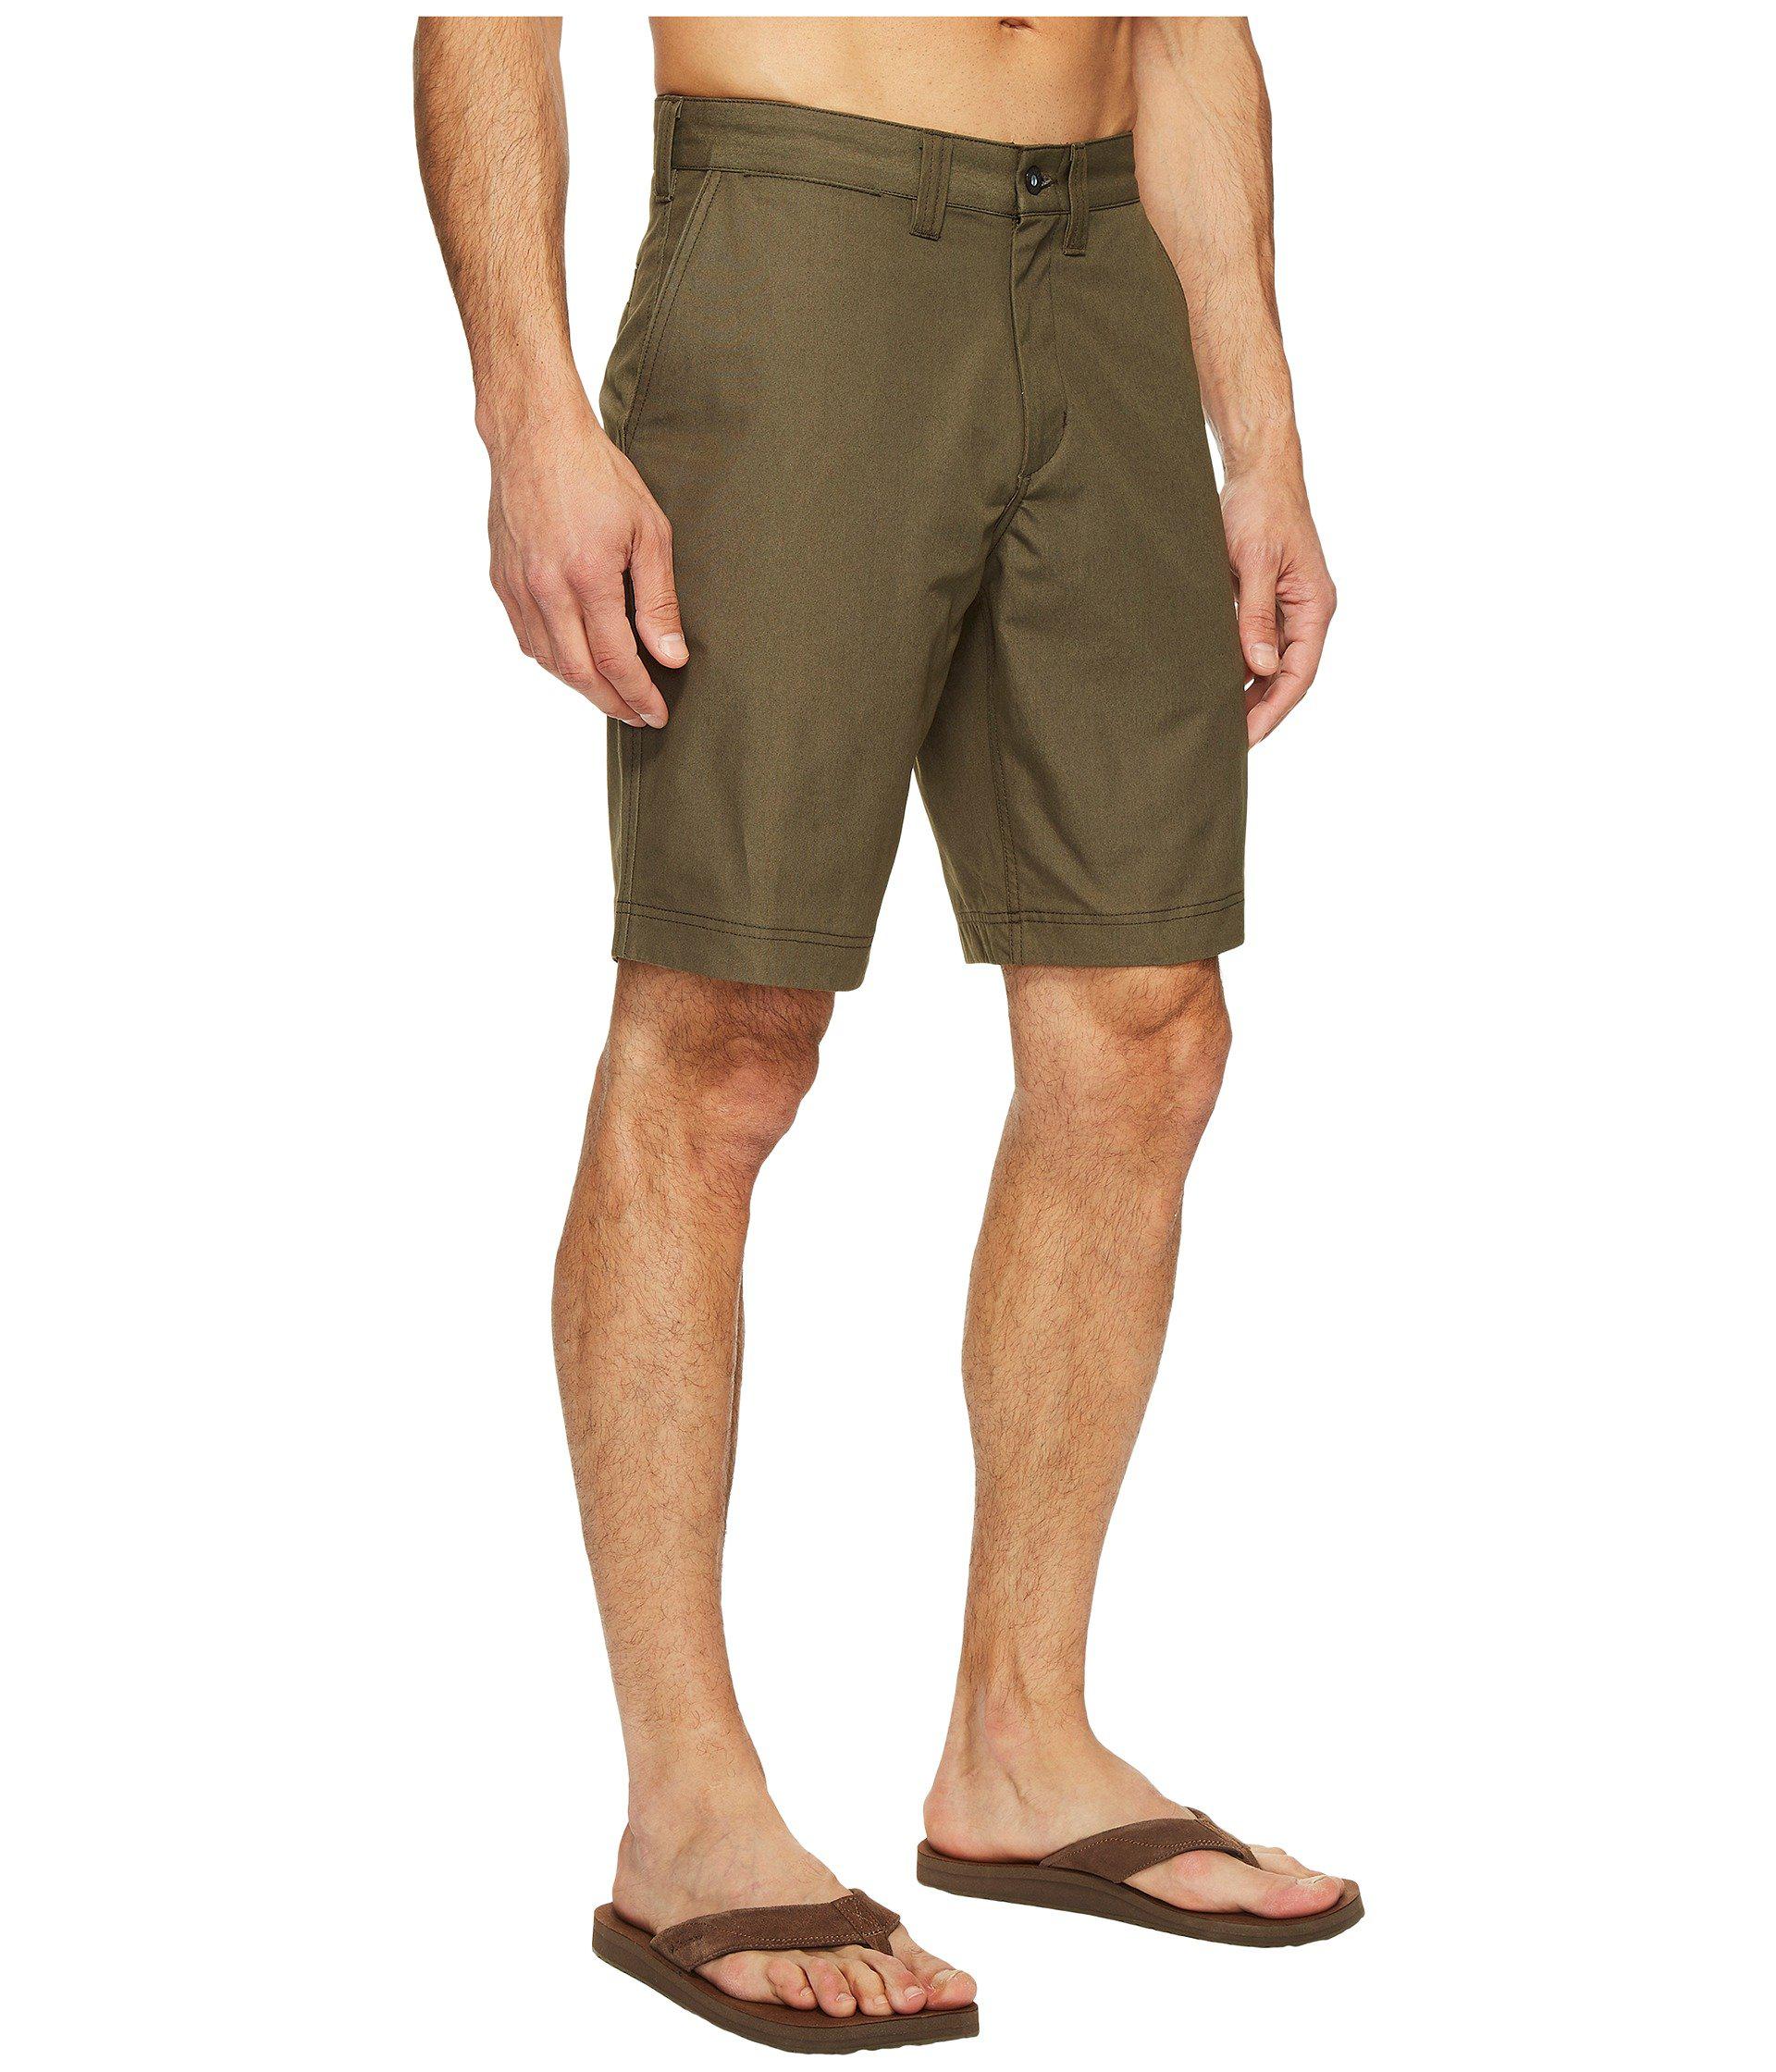 Filson Cotton Dry Shelter Cloth Shorts in Green for Men - Lyst